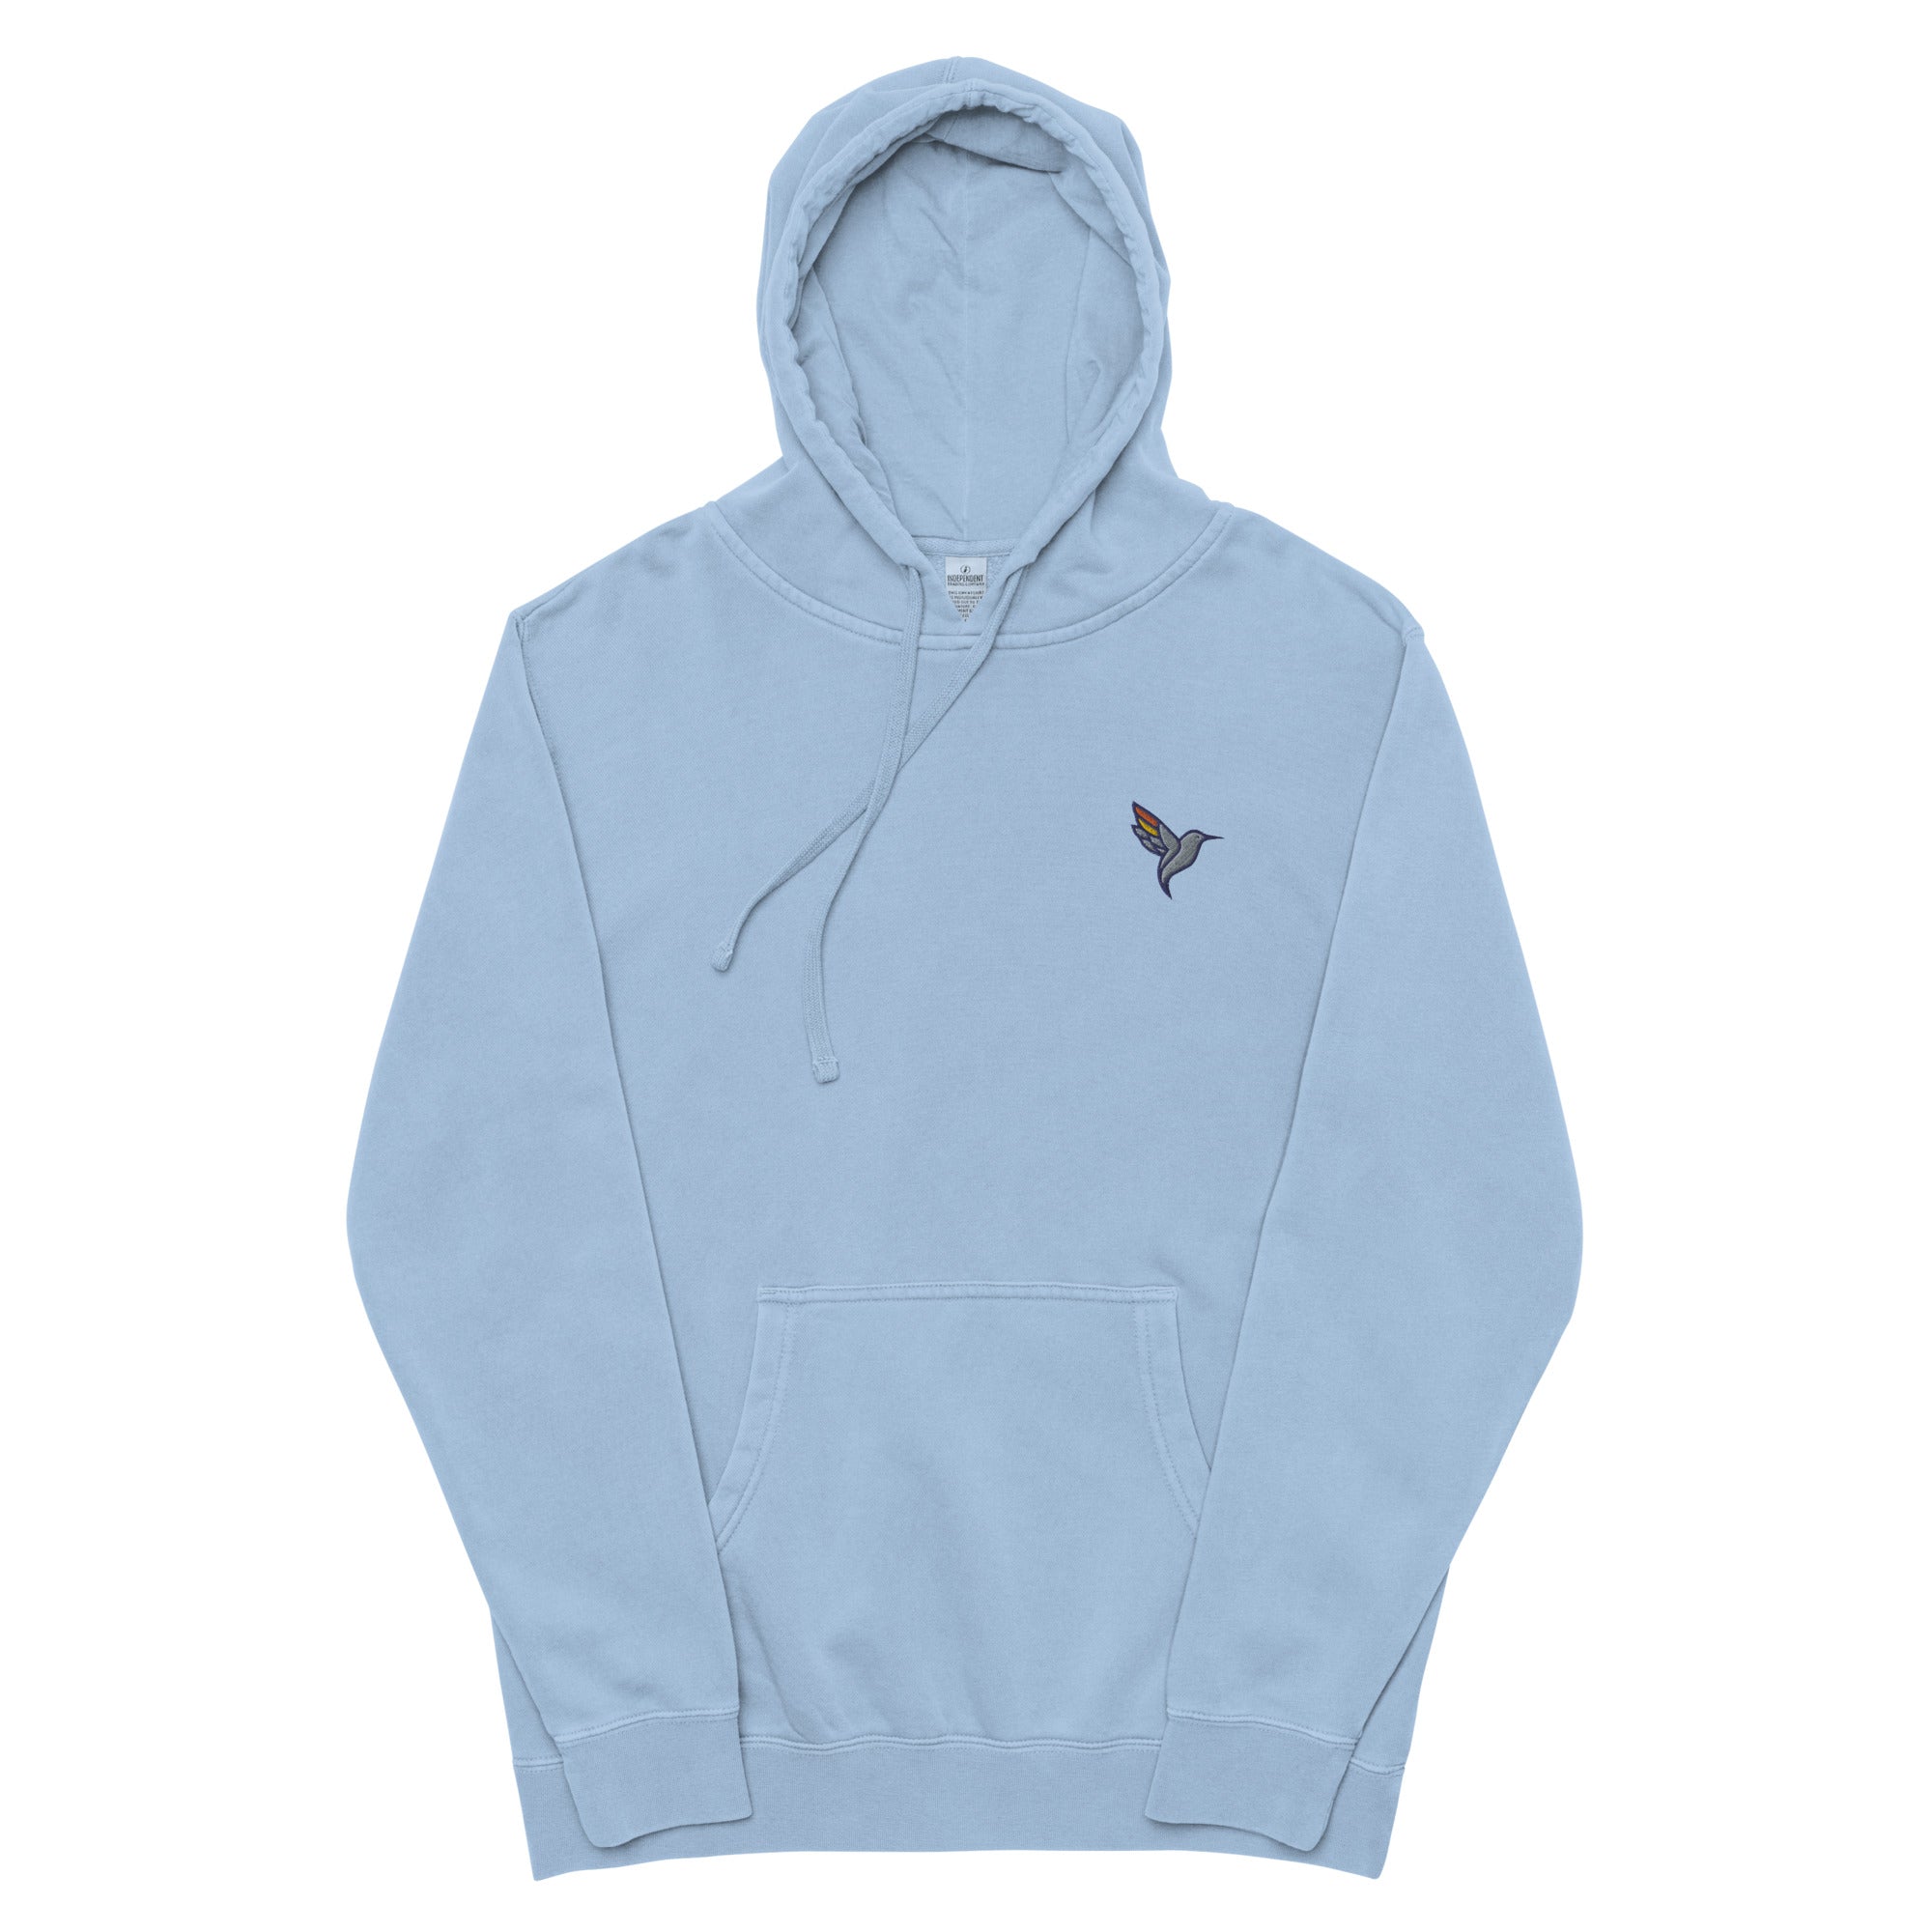 unisex-pigment-dyed-hoodie-pigment-light-blue-front-6530664f5f050.jpg